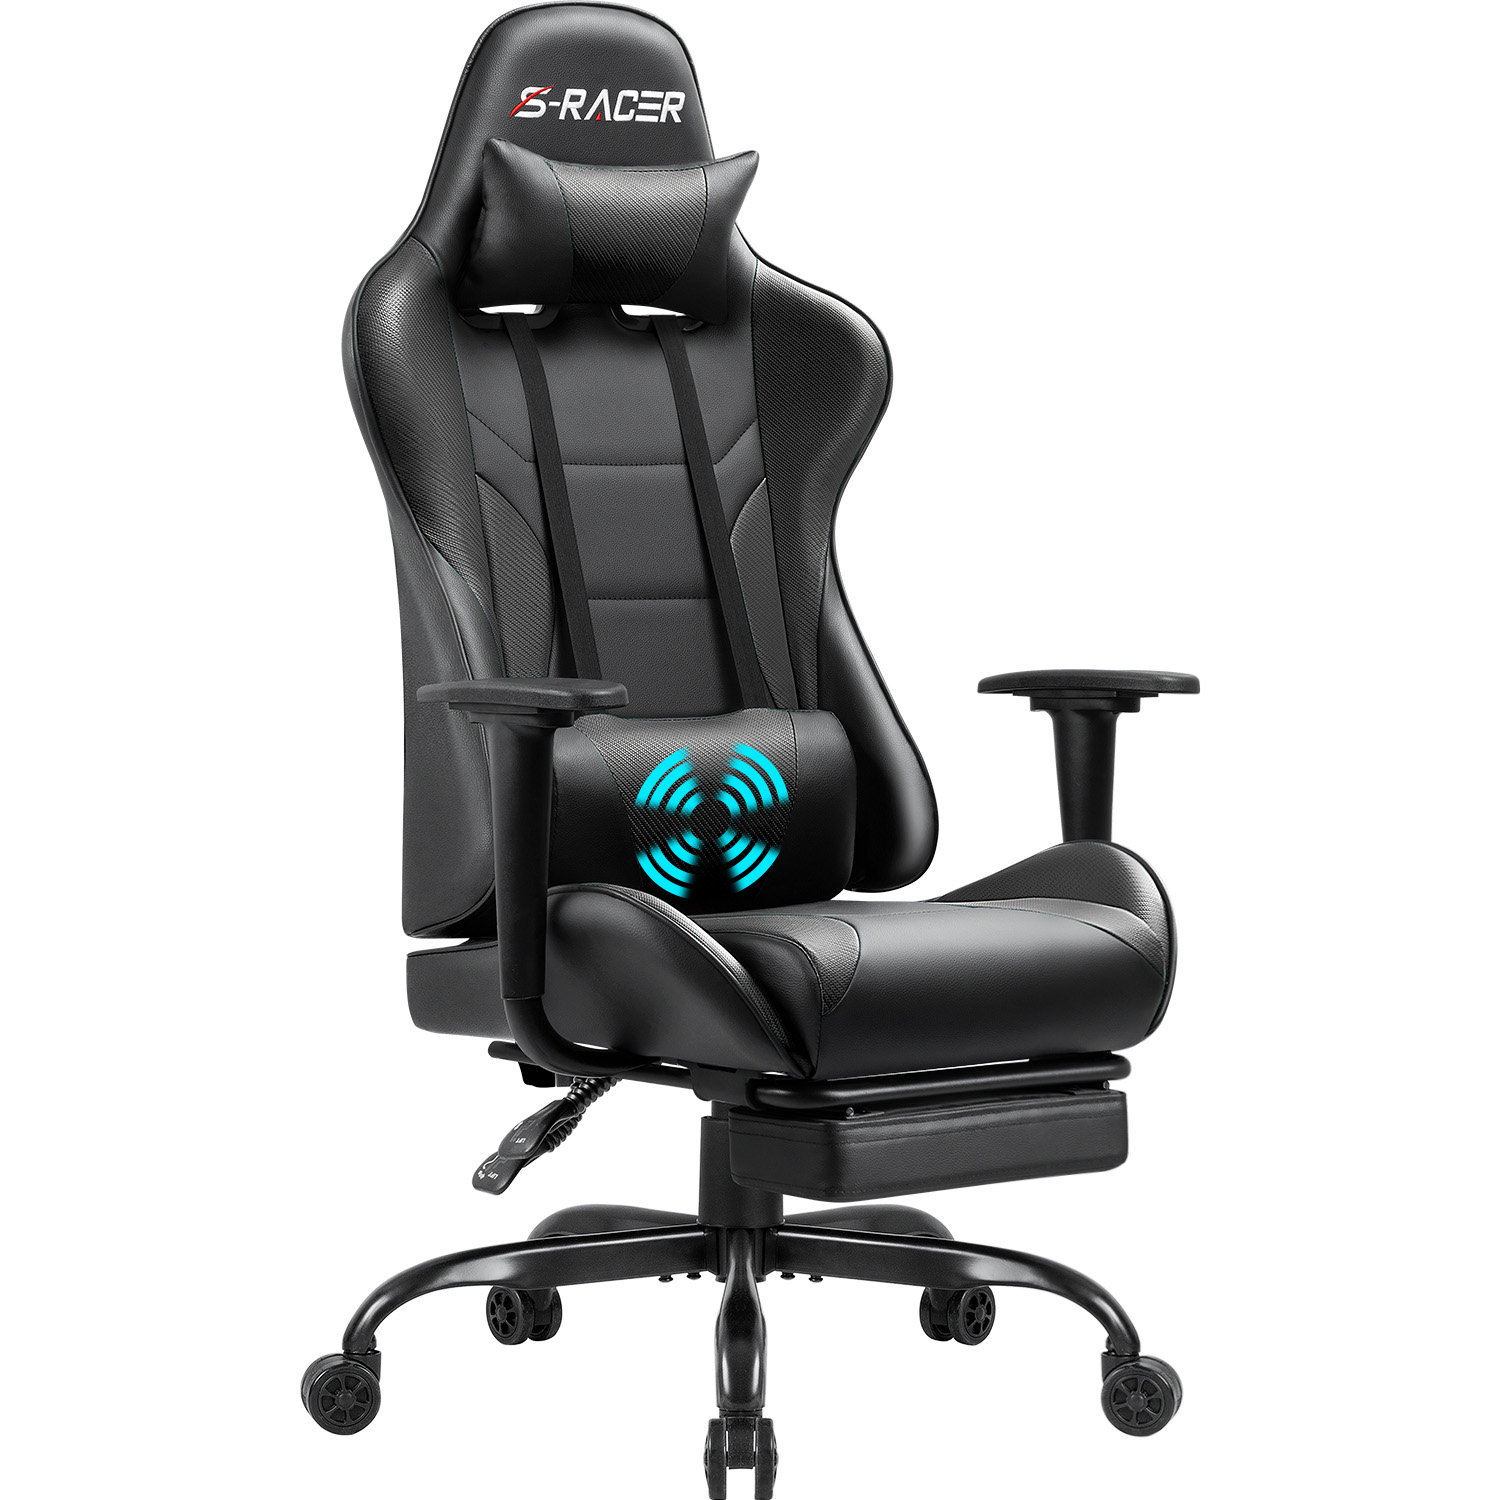 Gaming Chair w/ Foot Rest & Massager - Super Cool and Comfy! 